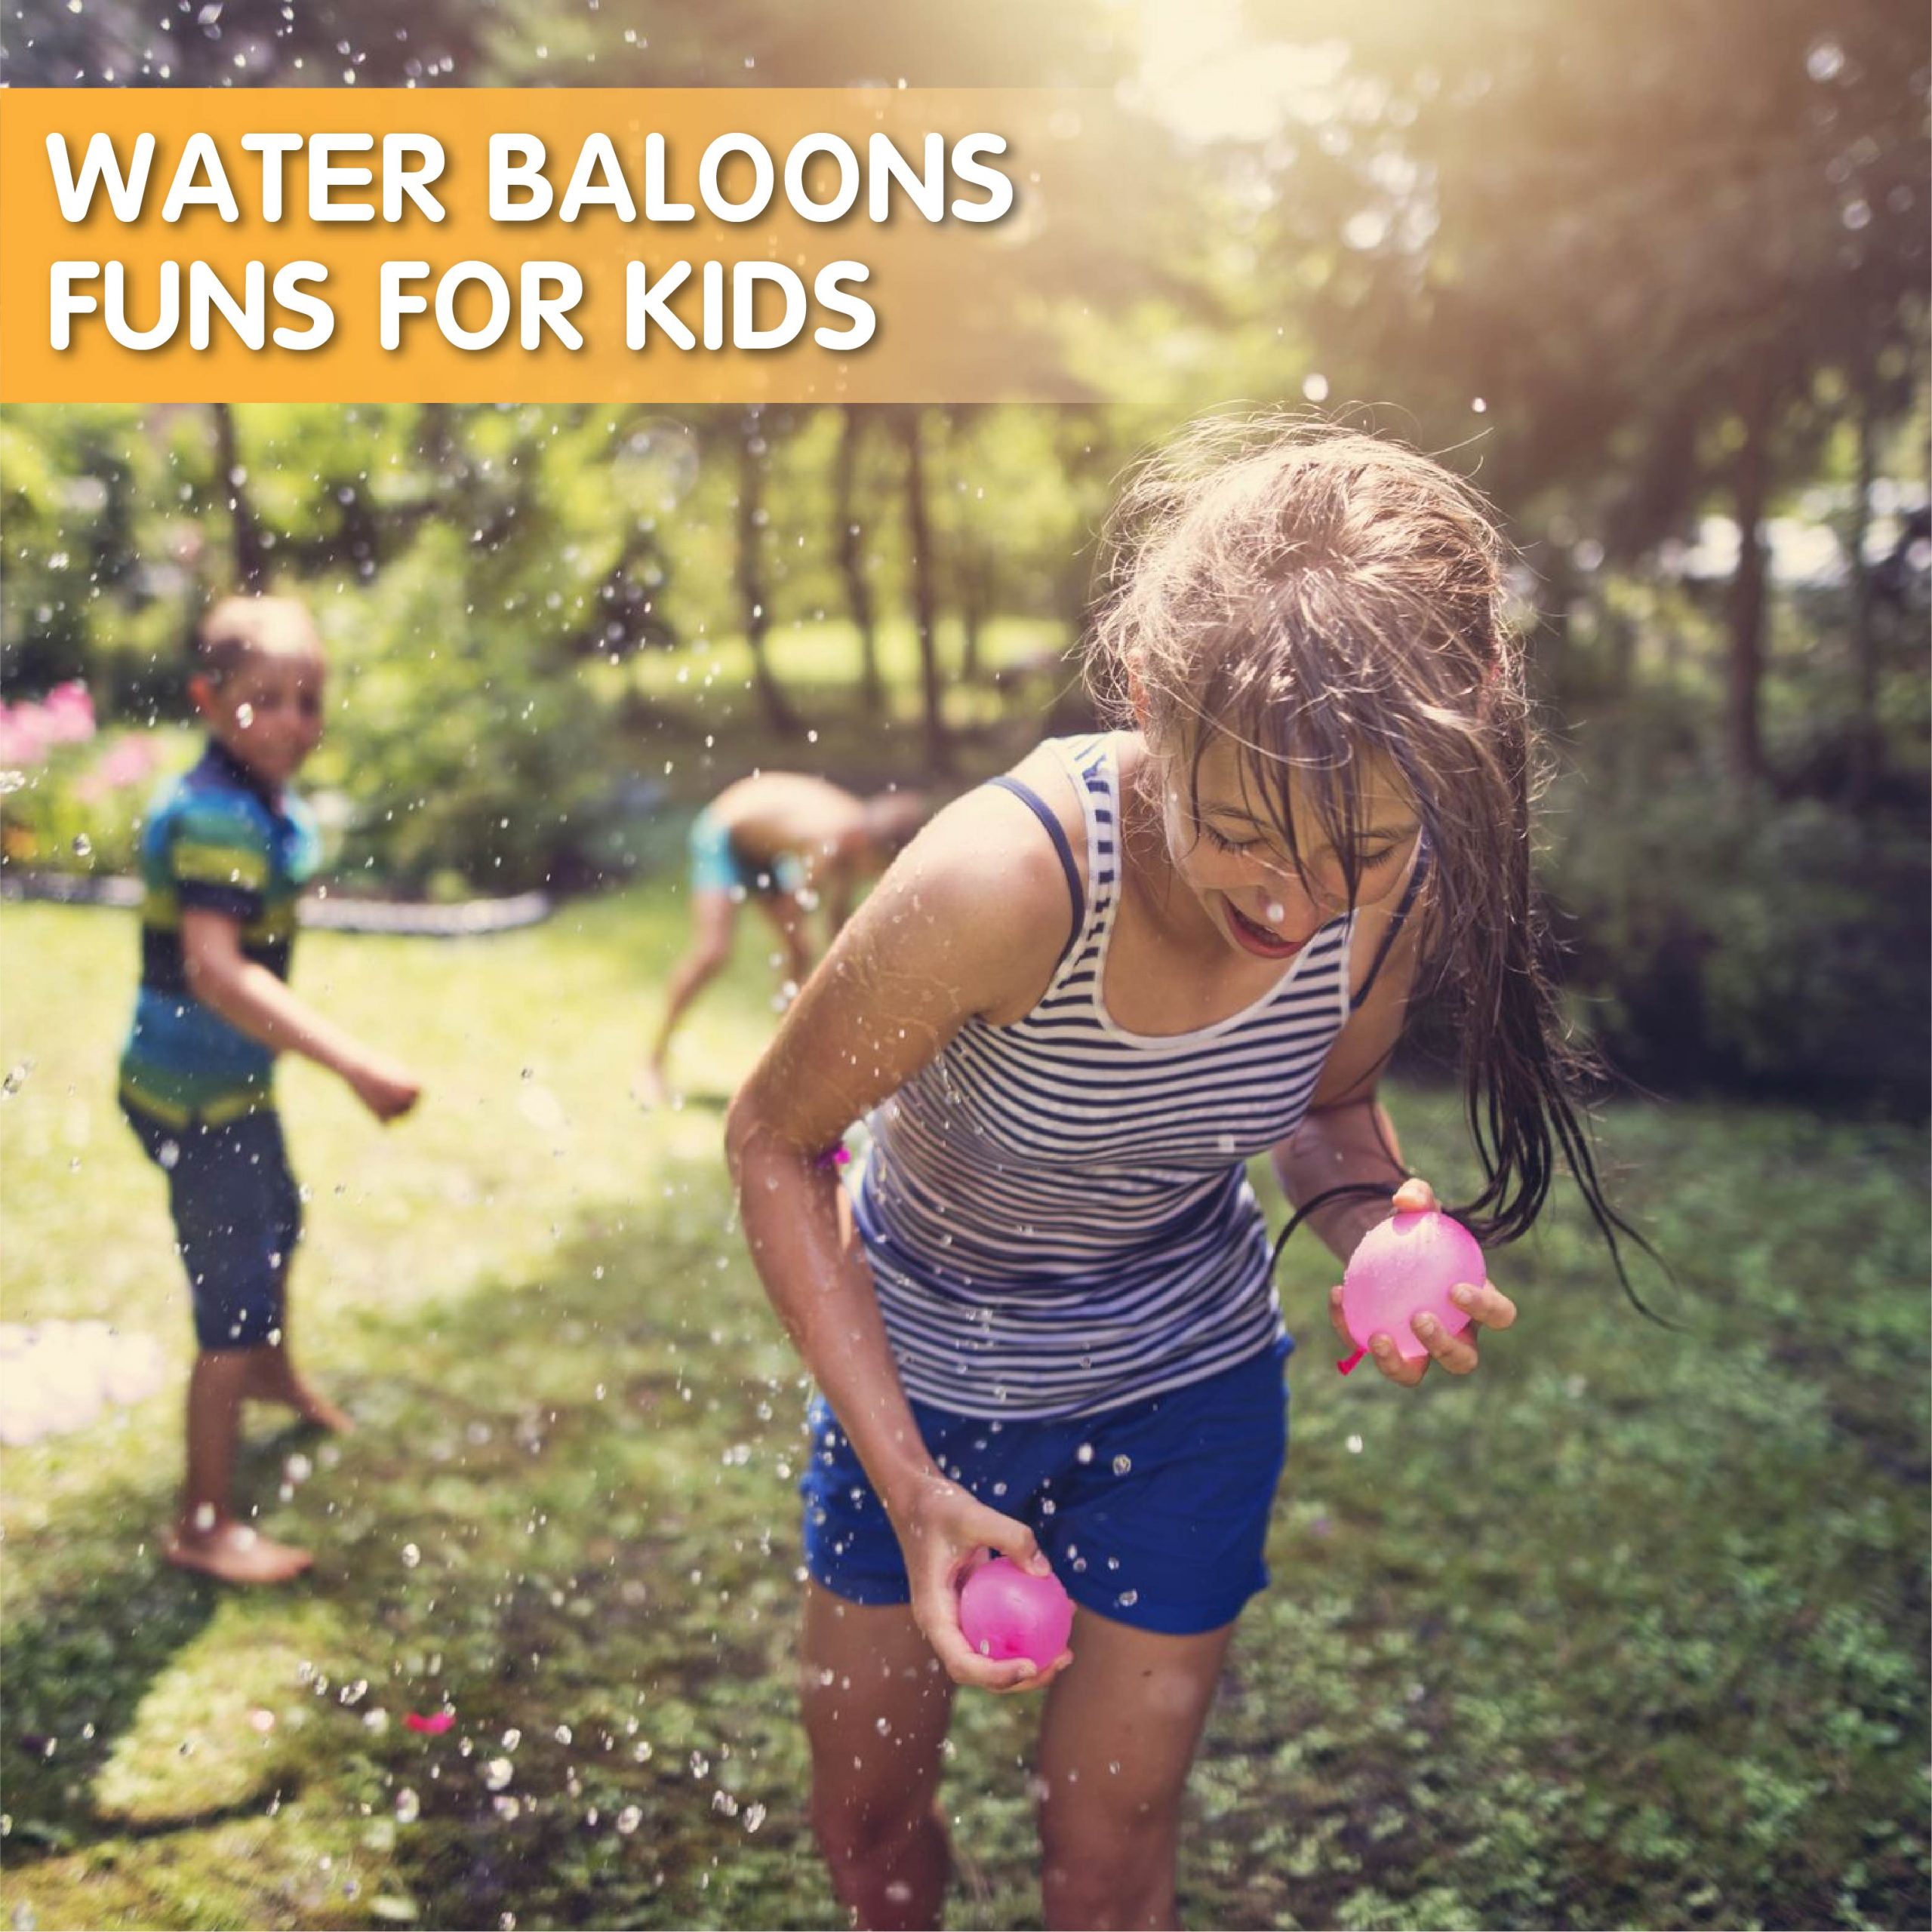 Water Balloons Biodegradable Water Balloons Easy Fill AQUAZA Water Balloons Party Games for Swimming Pool Water Balloons Bullk 555 PCS Rapid-Fill Water Balloons Water Balloons for Kids